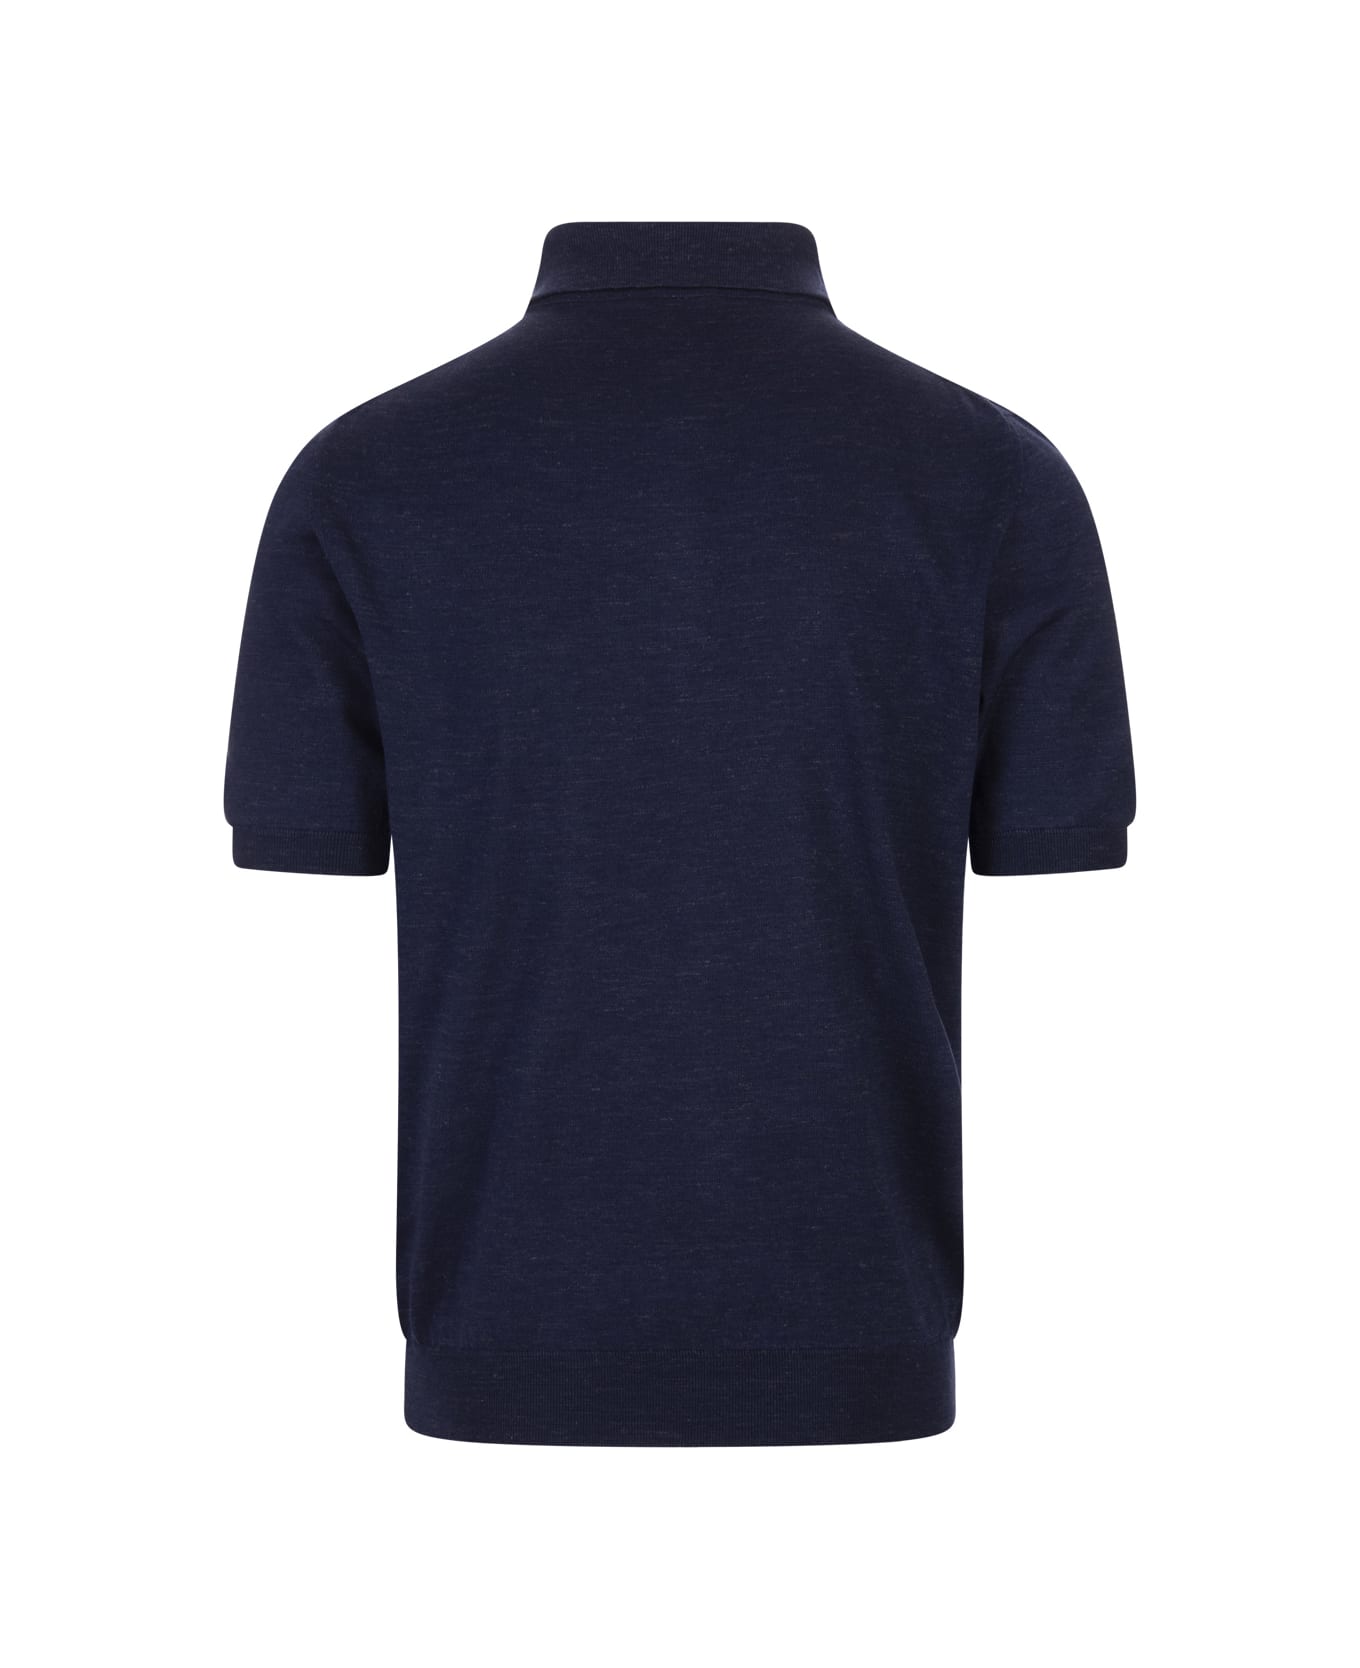 Kiton Navy Blue Knitted Short-sleeved Polo Shirt - Blue ポロシャツ